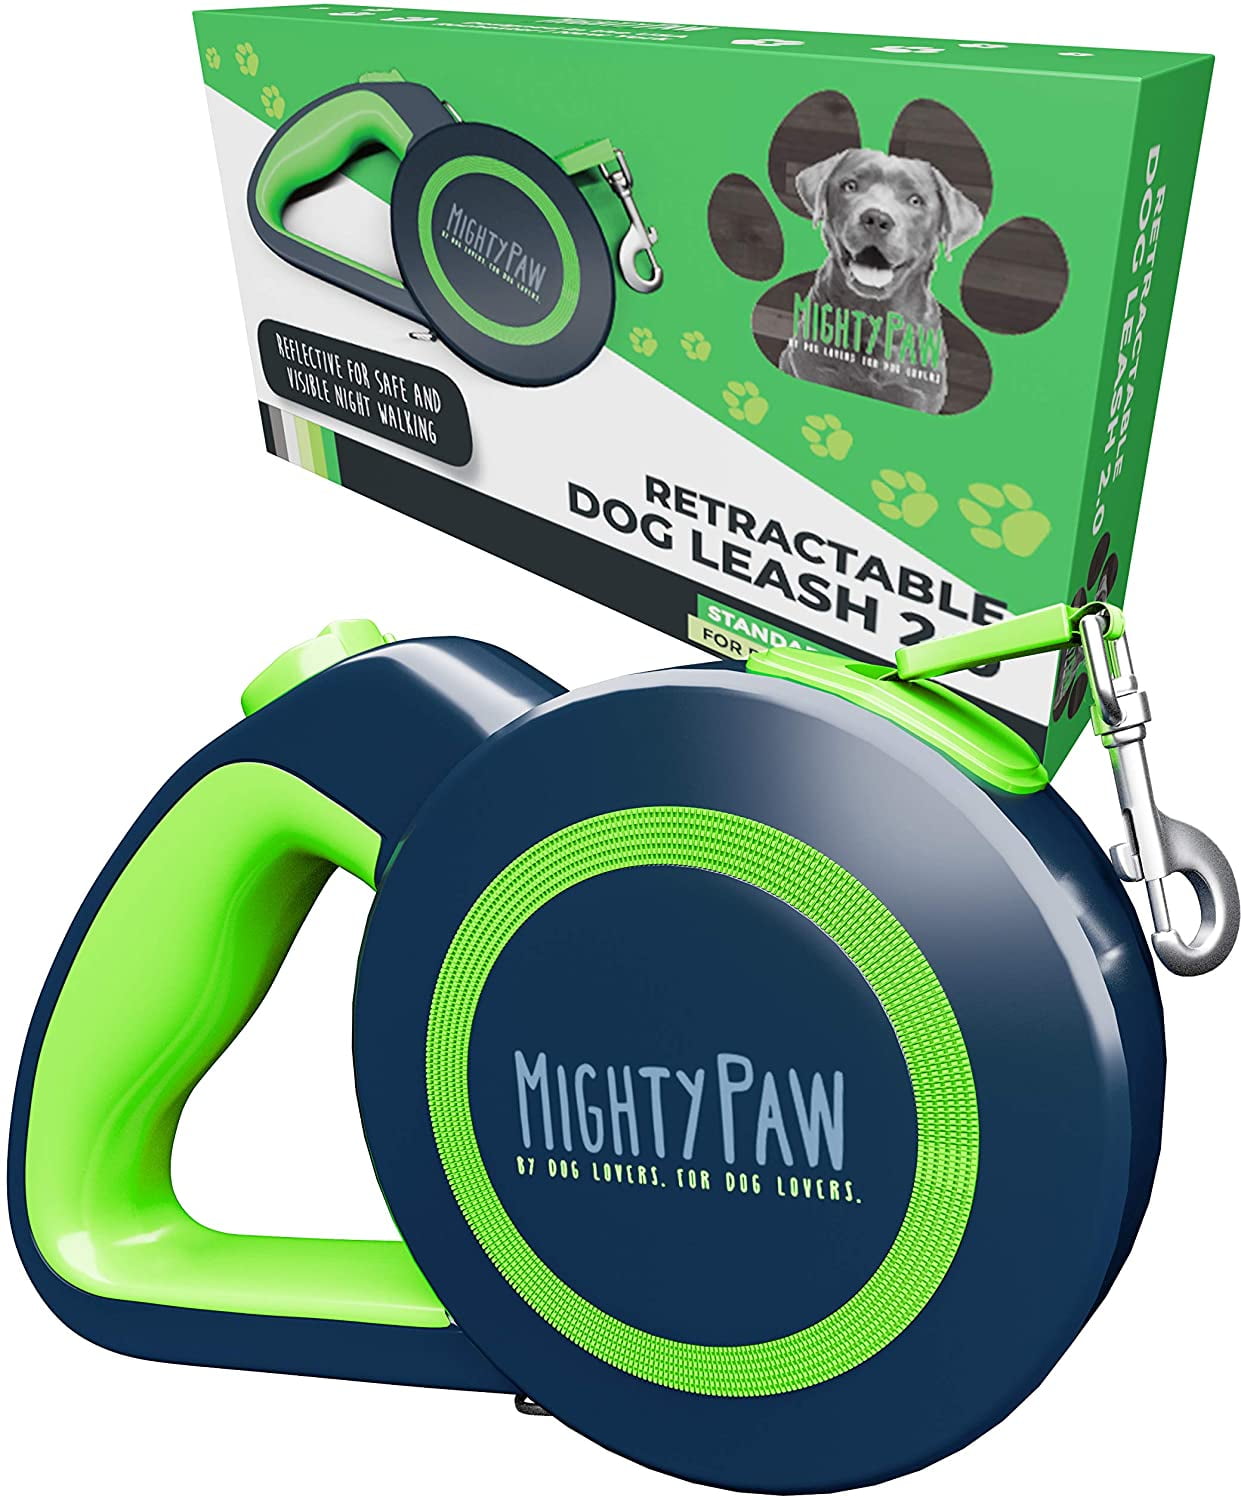 100% Satisfaction and Money Back Guarantee! #1 Heavy Duty Retractable Dog Leash By Hertzko Strong Nylon Ribbon Extends 16ft Great for Small & Medium Dogs up to 44lbs